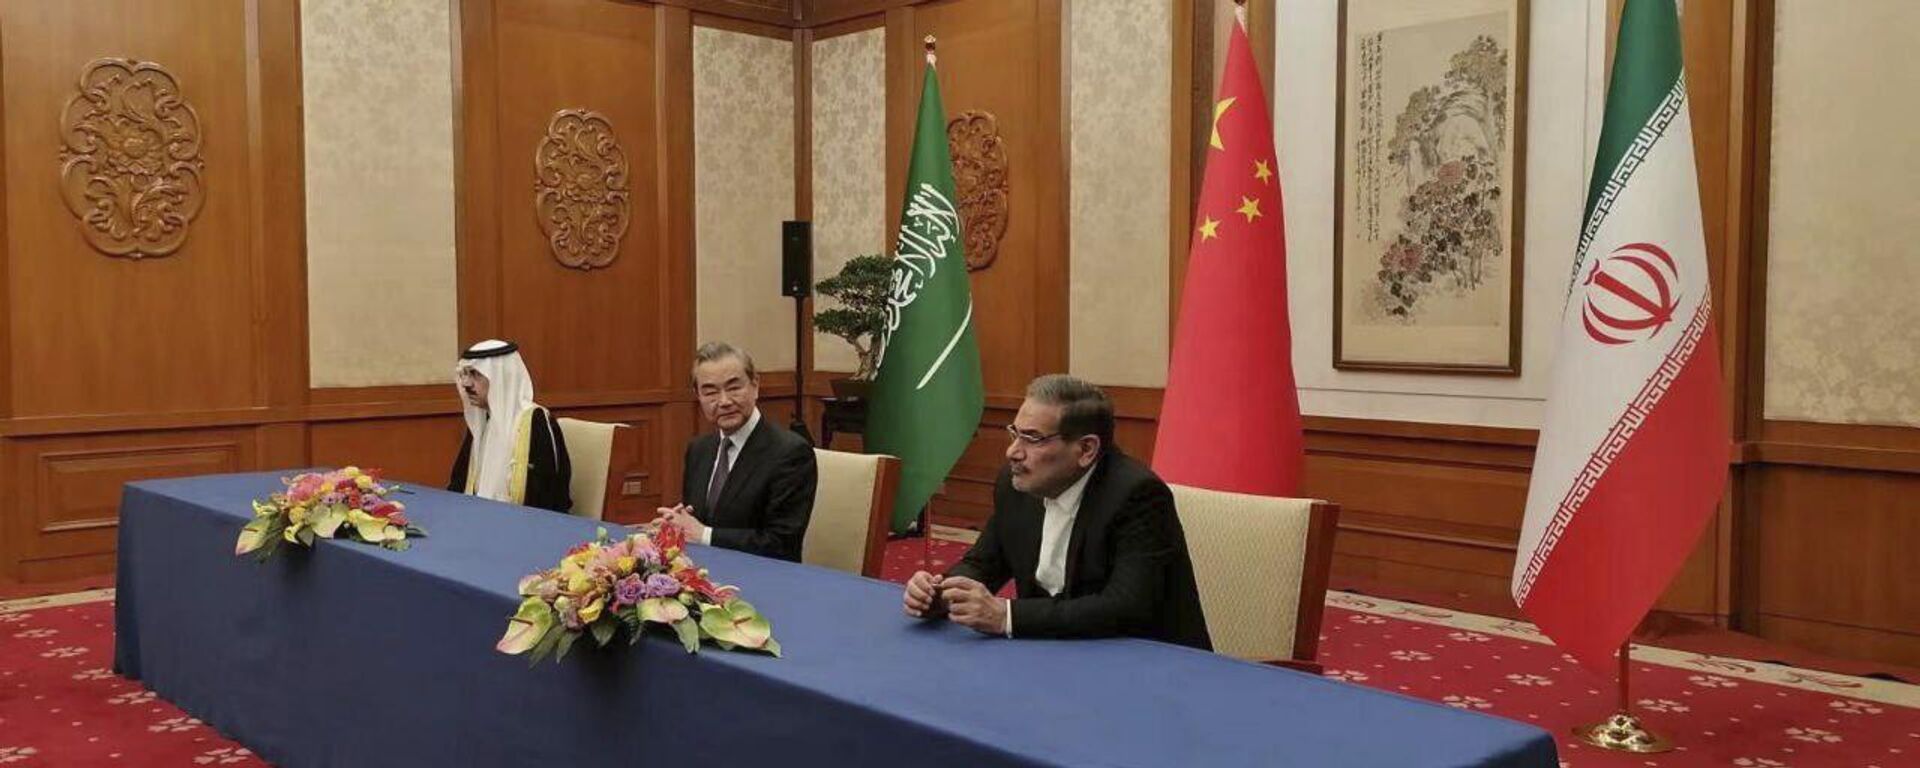 In this photo released by Nournews, Secretary of Iran's Supreme National Security Council, Ali Shamkhani, right, China's most senior diplomat Wang Yi, center, and Saudi Arabia's National Security Adviser Musaad bin Mohammed al-Aiban looks on during an agreement signing ceremony between Iran and Saudi Arabia to reestablish diplomatic relations and reopen embassies after seven years of tensions between the Mideast rivals, in Beijing, China, Friday, March 10, 2023. - Sputnik International, 1920, 18.04.2023